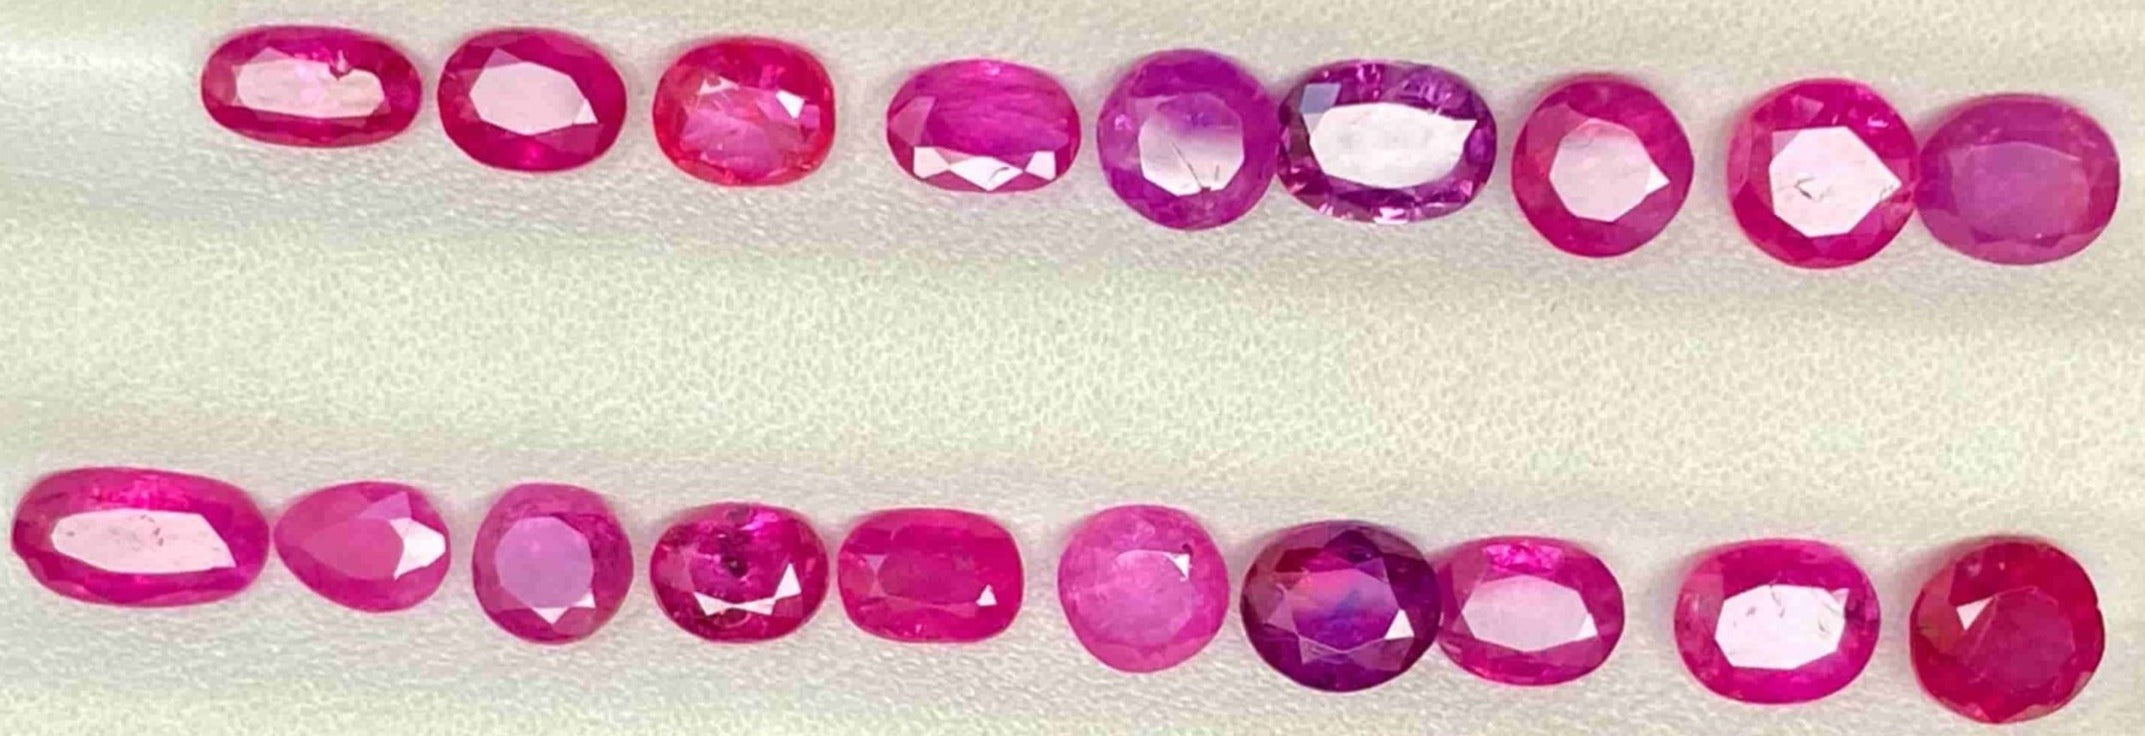 10.75 carats Afghan Ruby